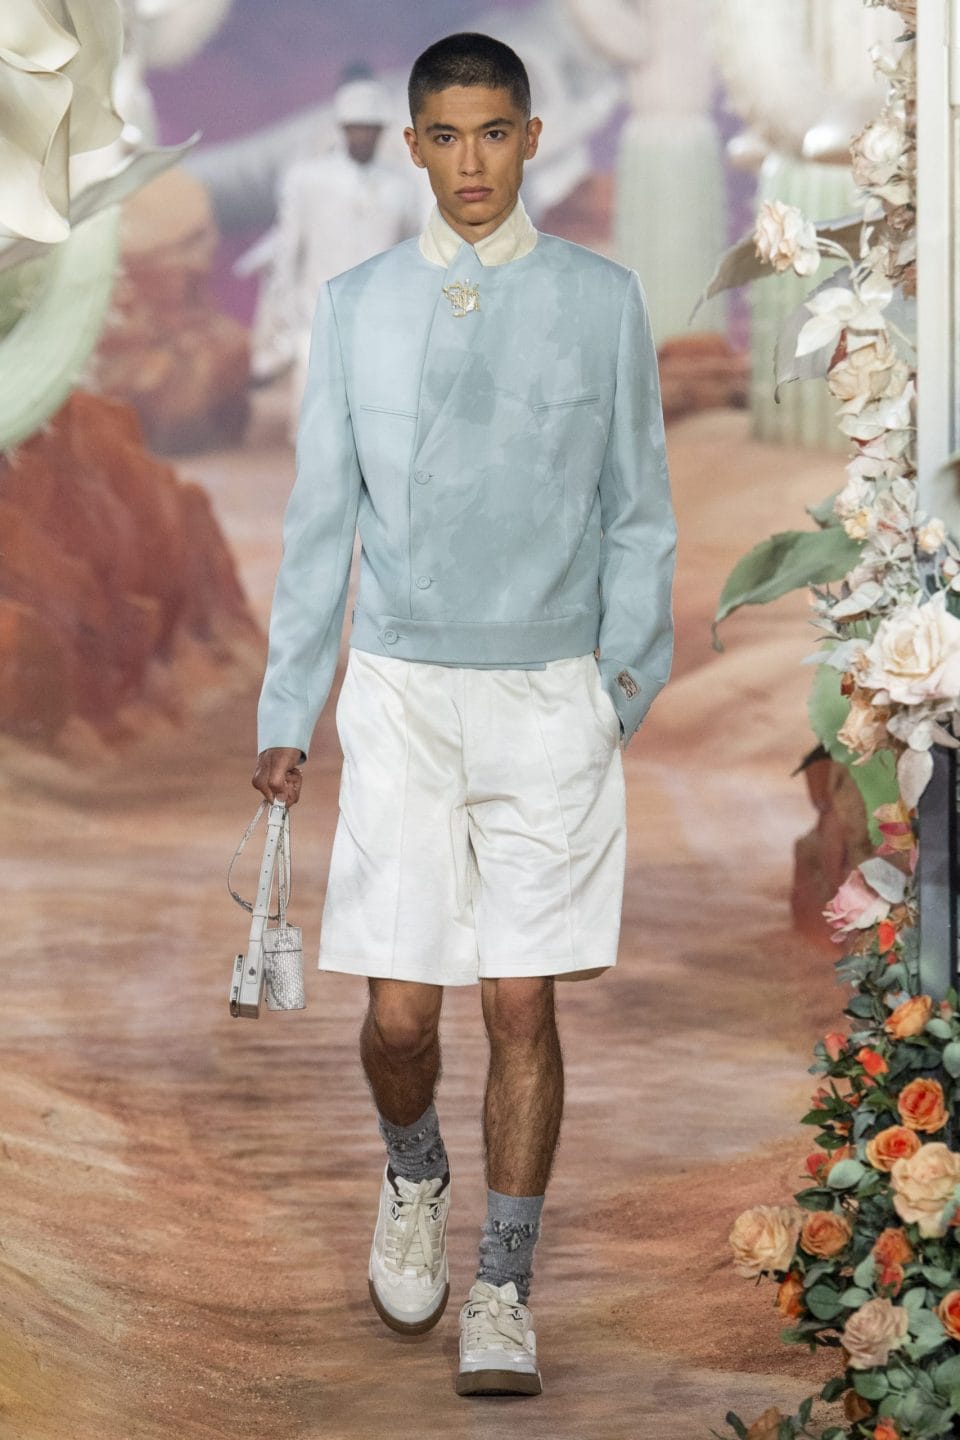 Dior Men Summer 2022 Collection is A Fully-Developed Artist Collaboration